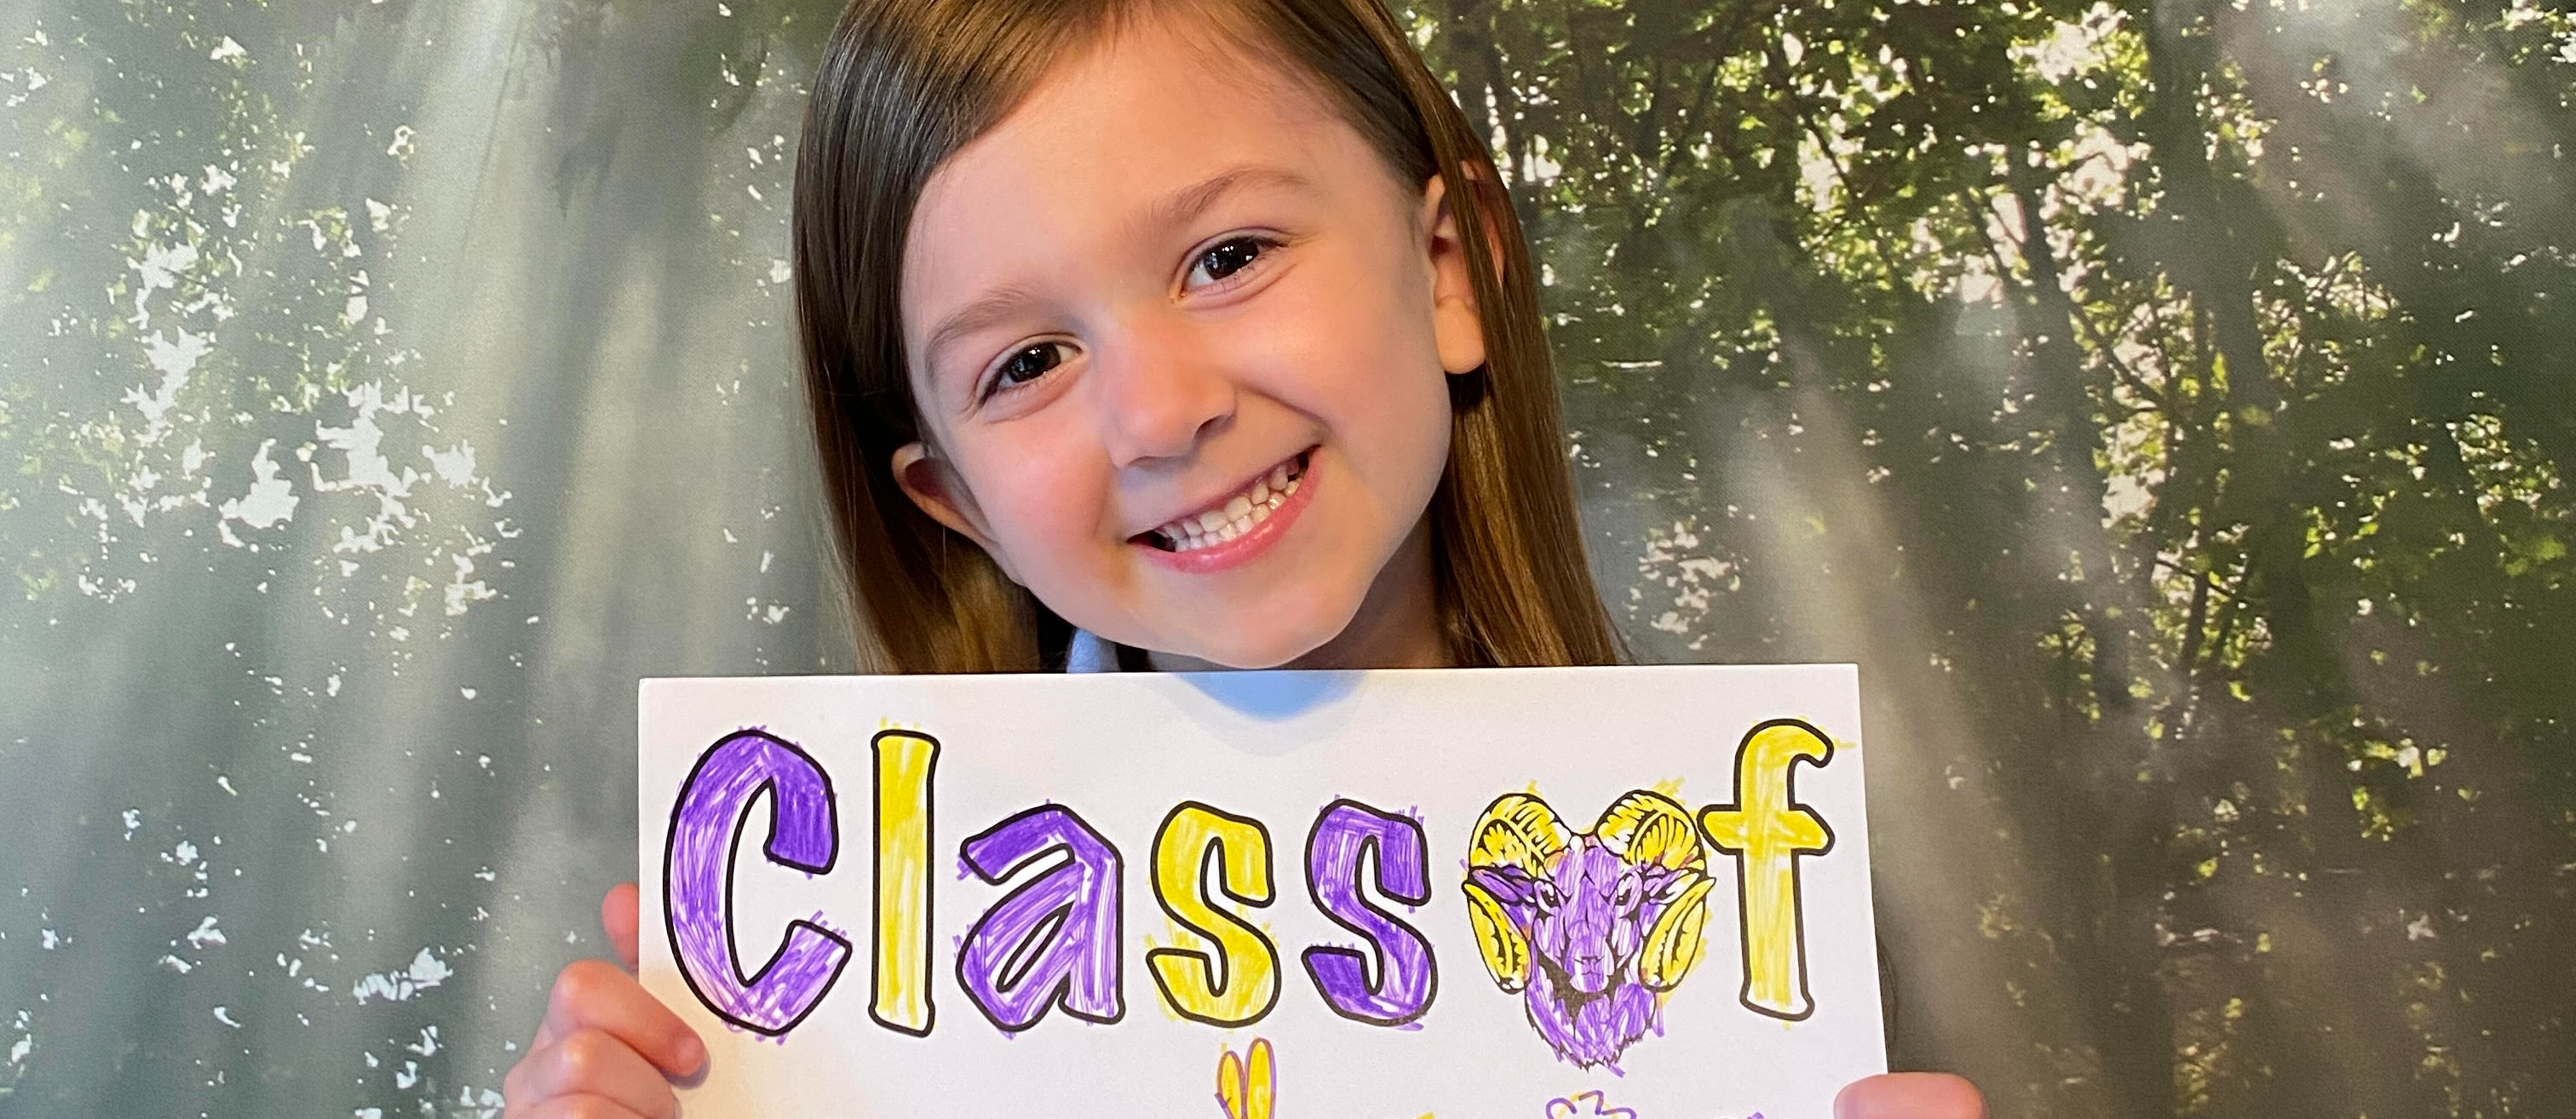 Student with Class of 2034 sign